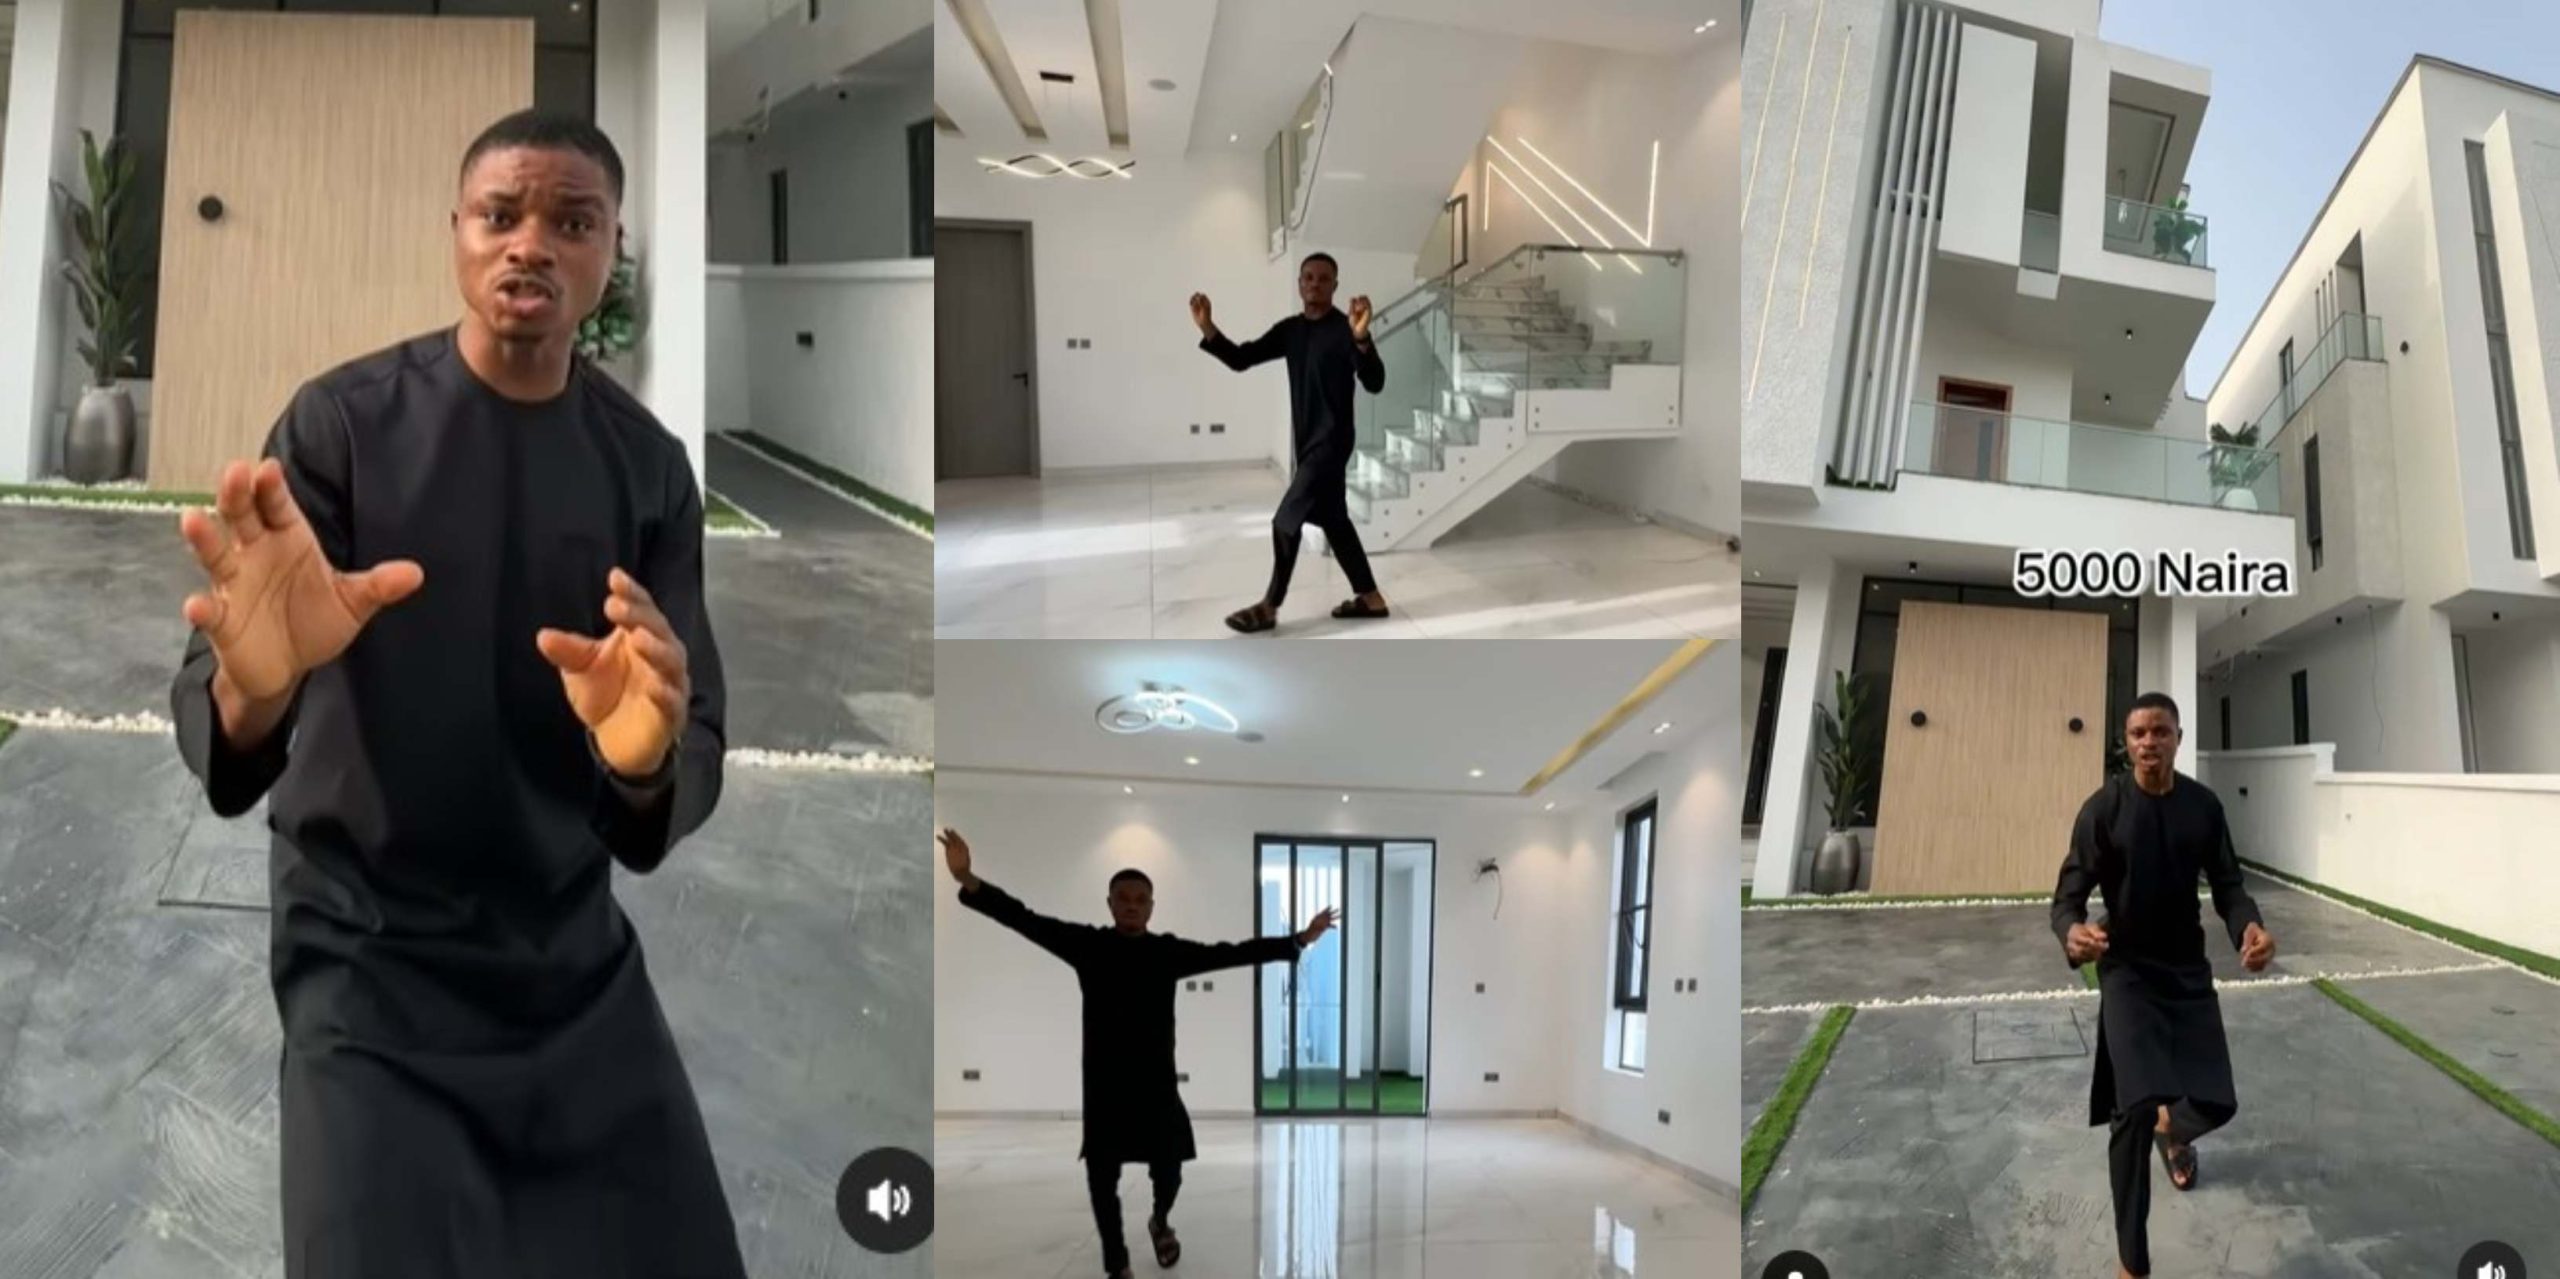 Nigerians react as billionaire offers to sell his luxurious mansion worth N350M in Lekki for just N5000